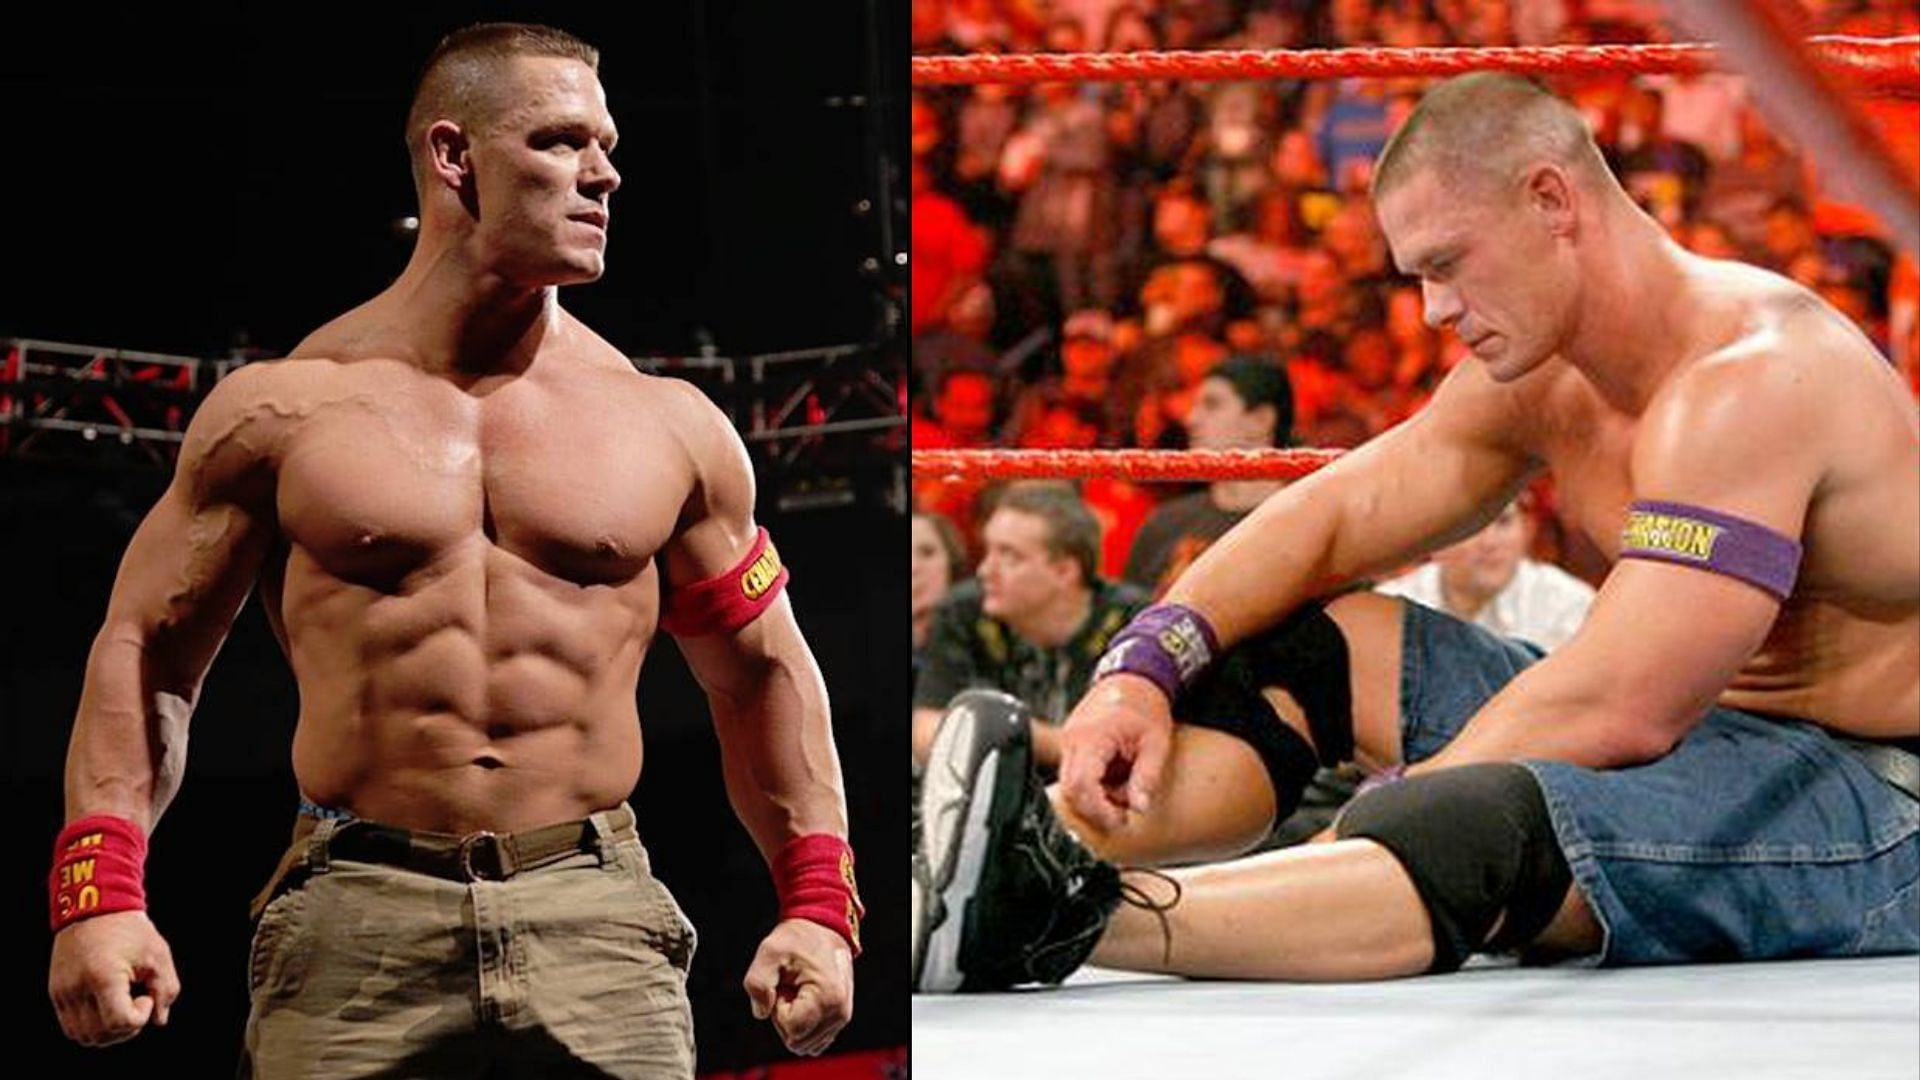 John Cena is one of the most recognizable names of WWE even today